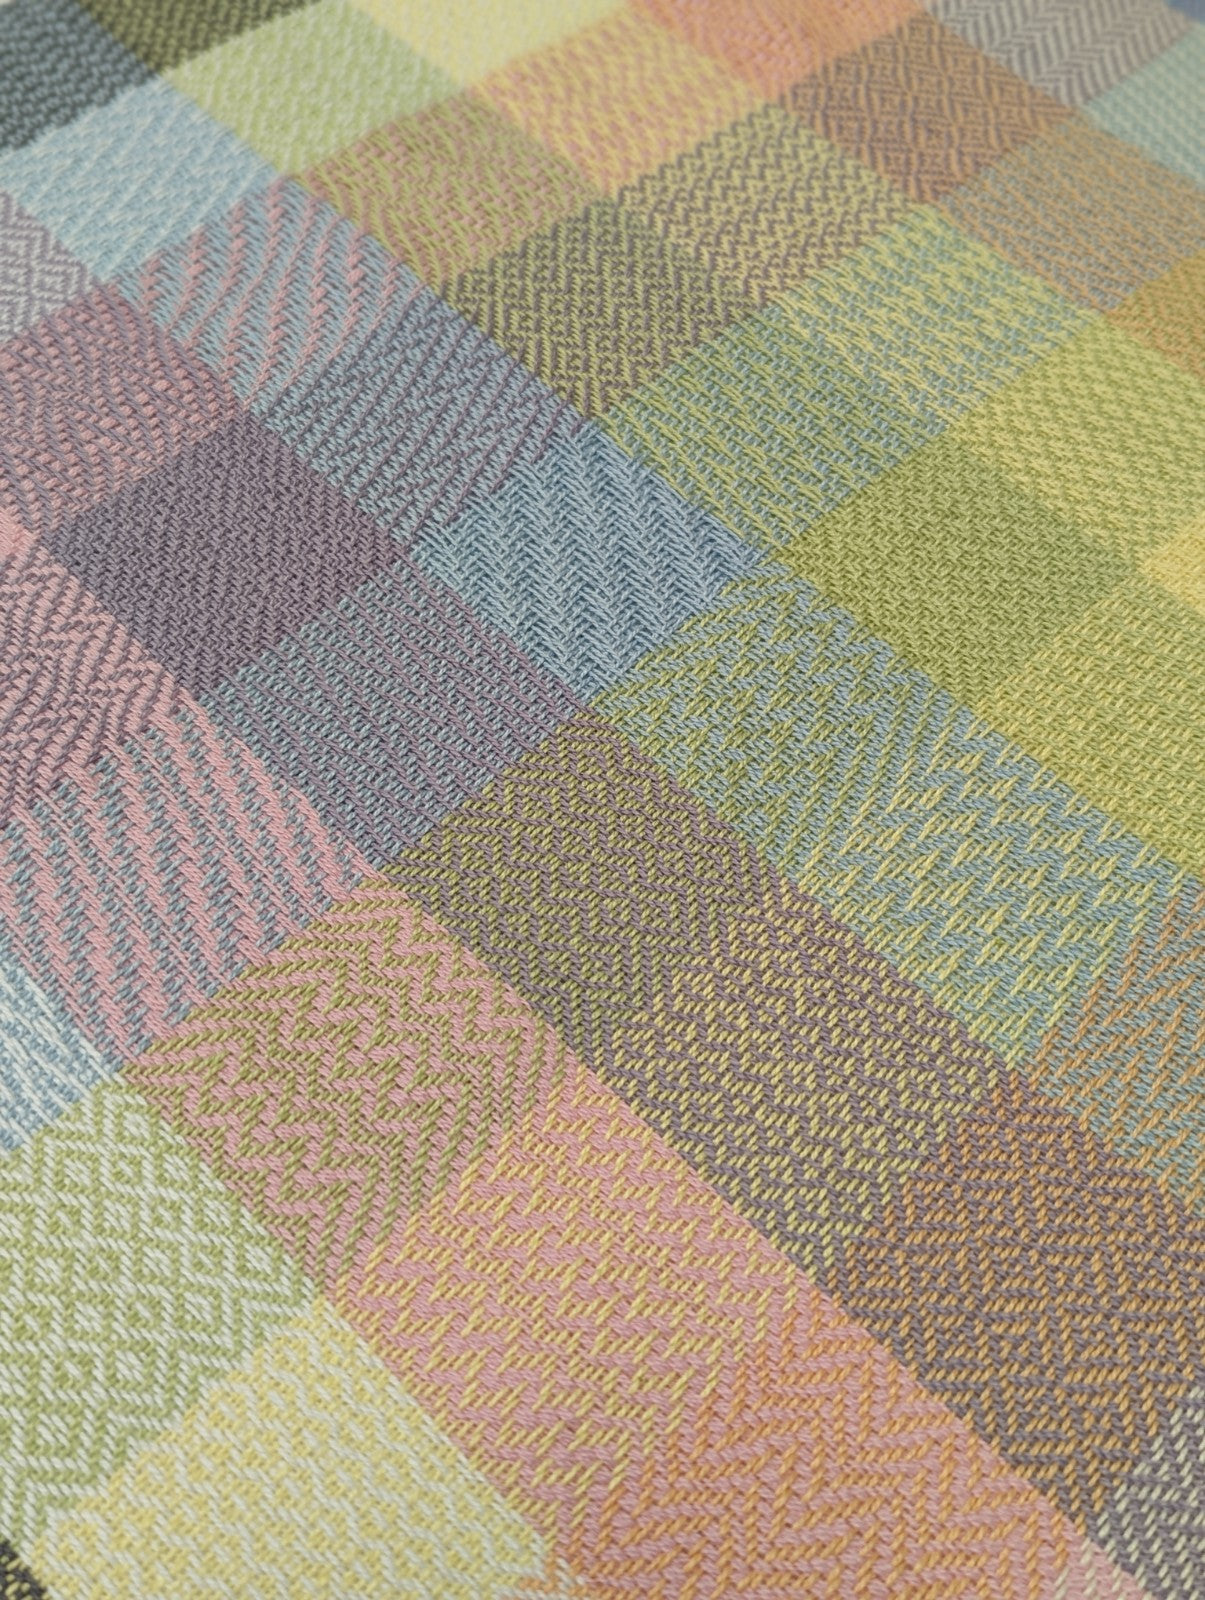 Weave-A-Project (Color & Pattern Gamp)